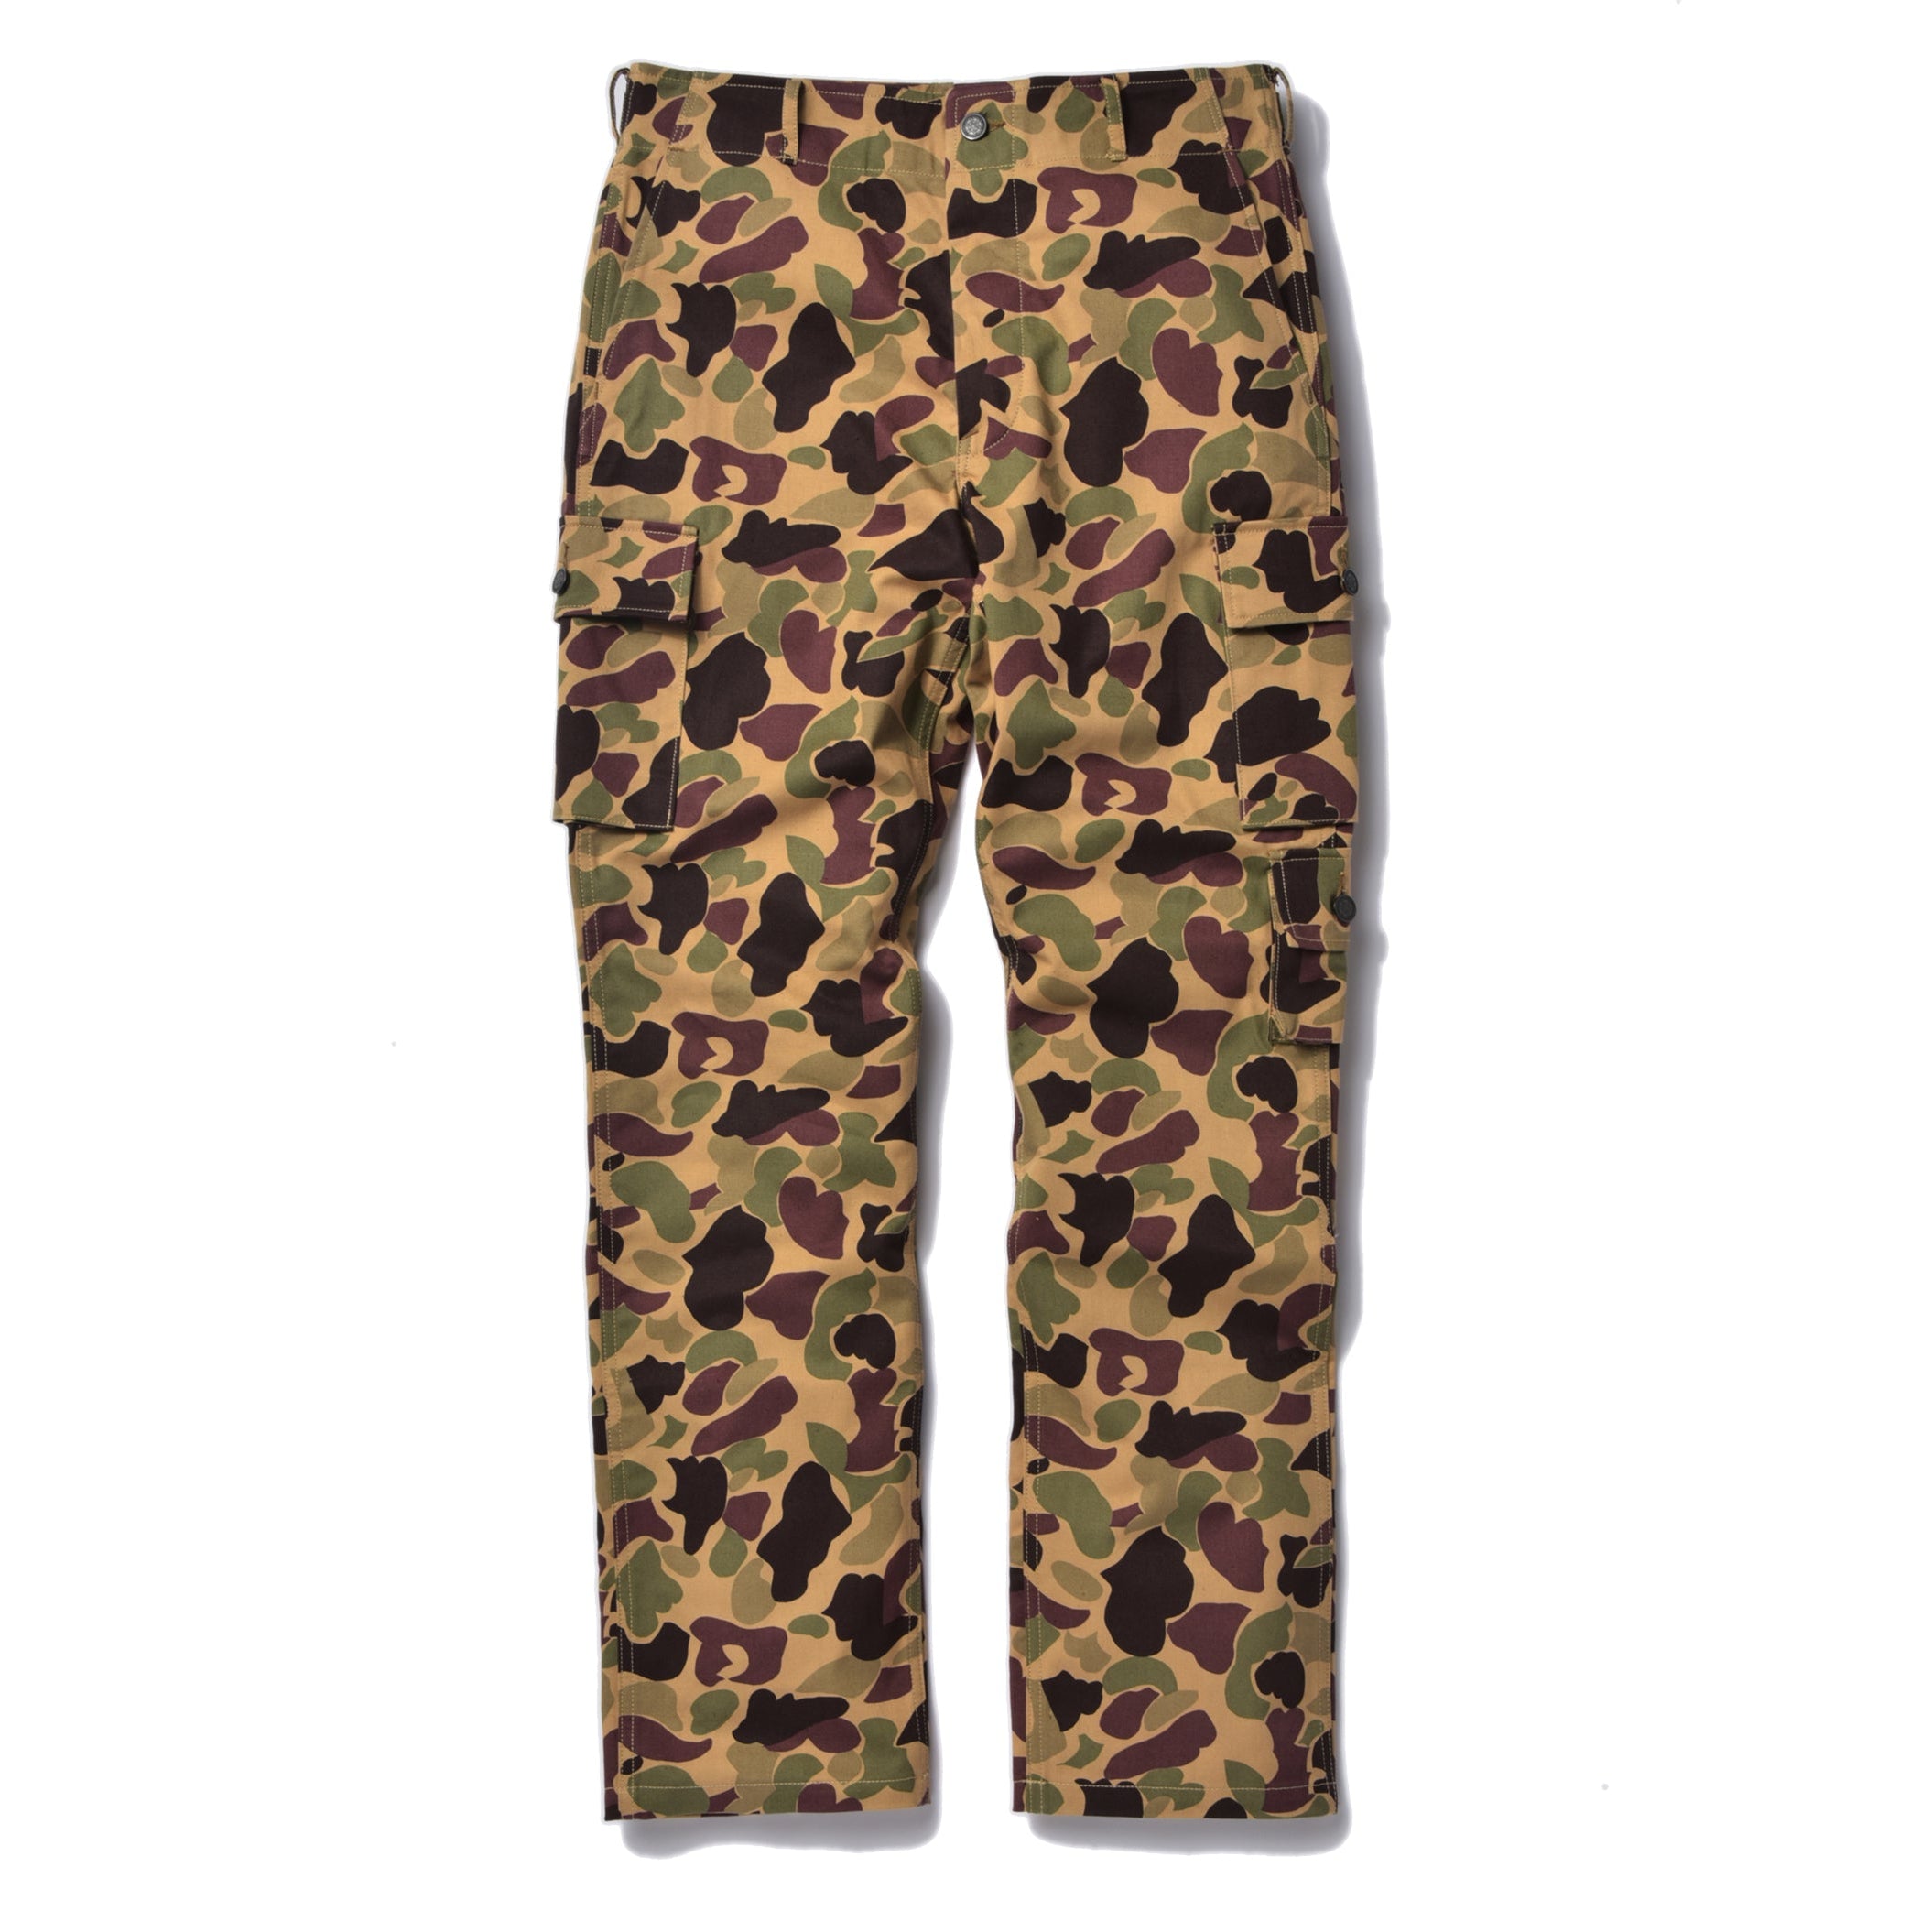 BEO GAM CAMOUFLAGE TROUSERS – The Real McCoy's